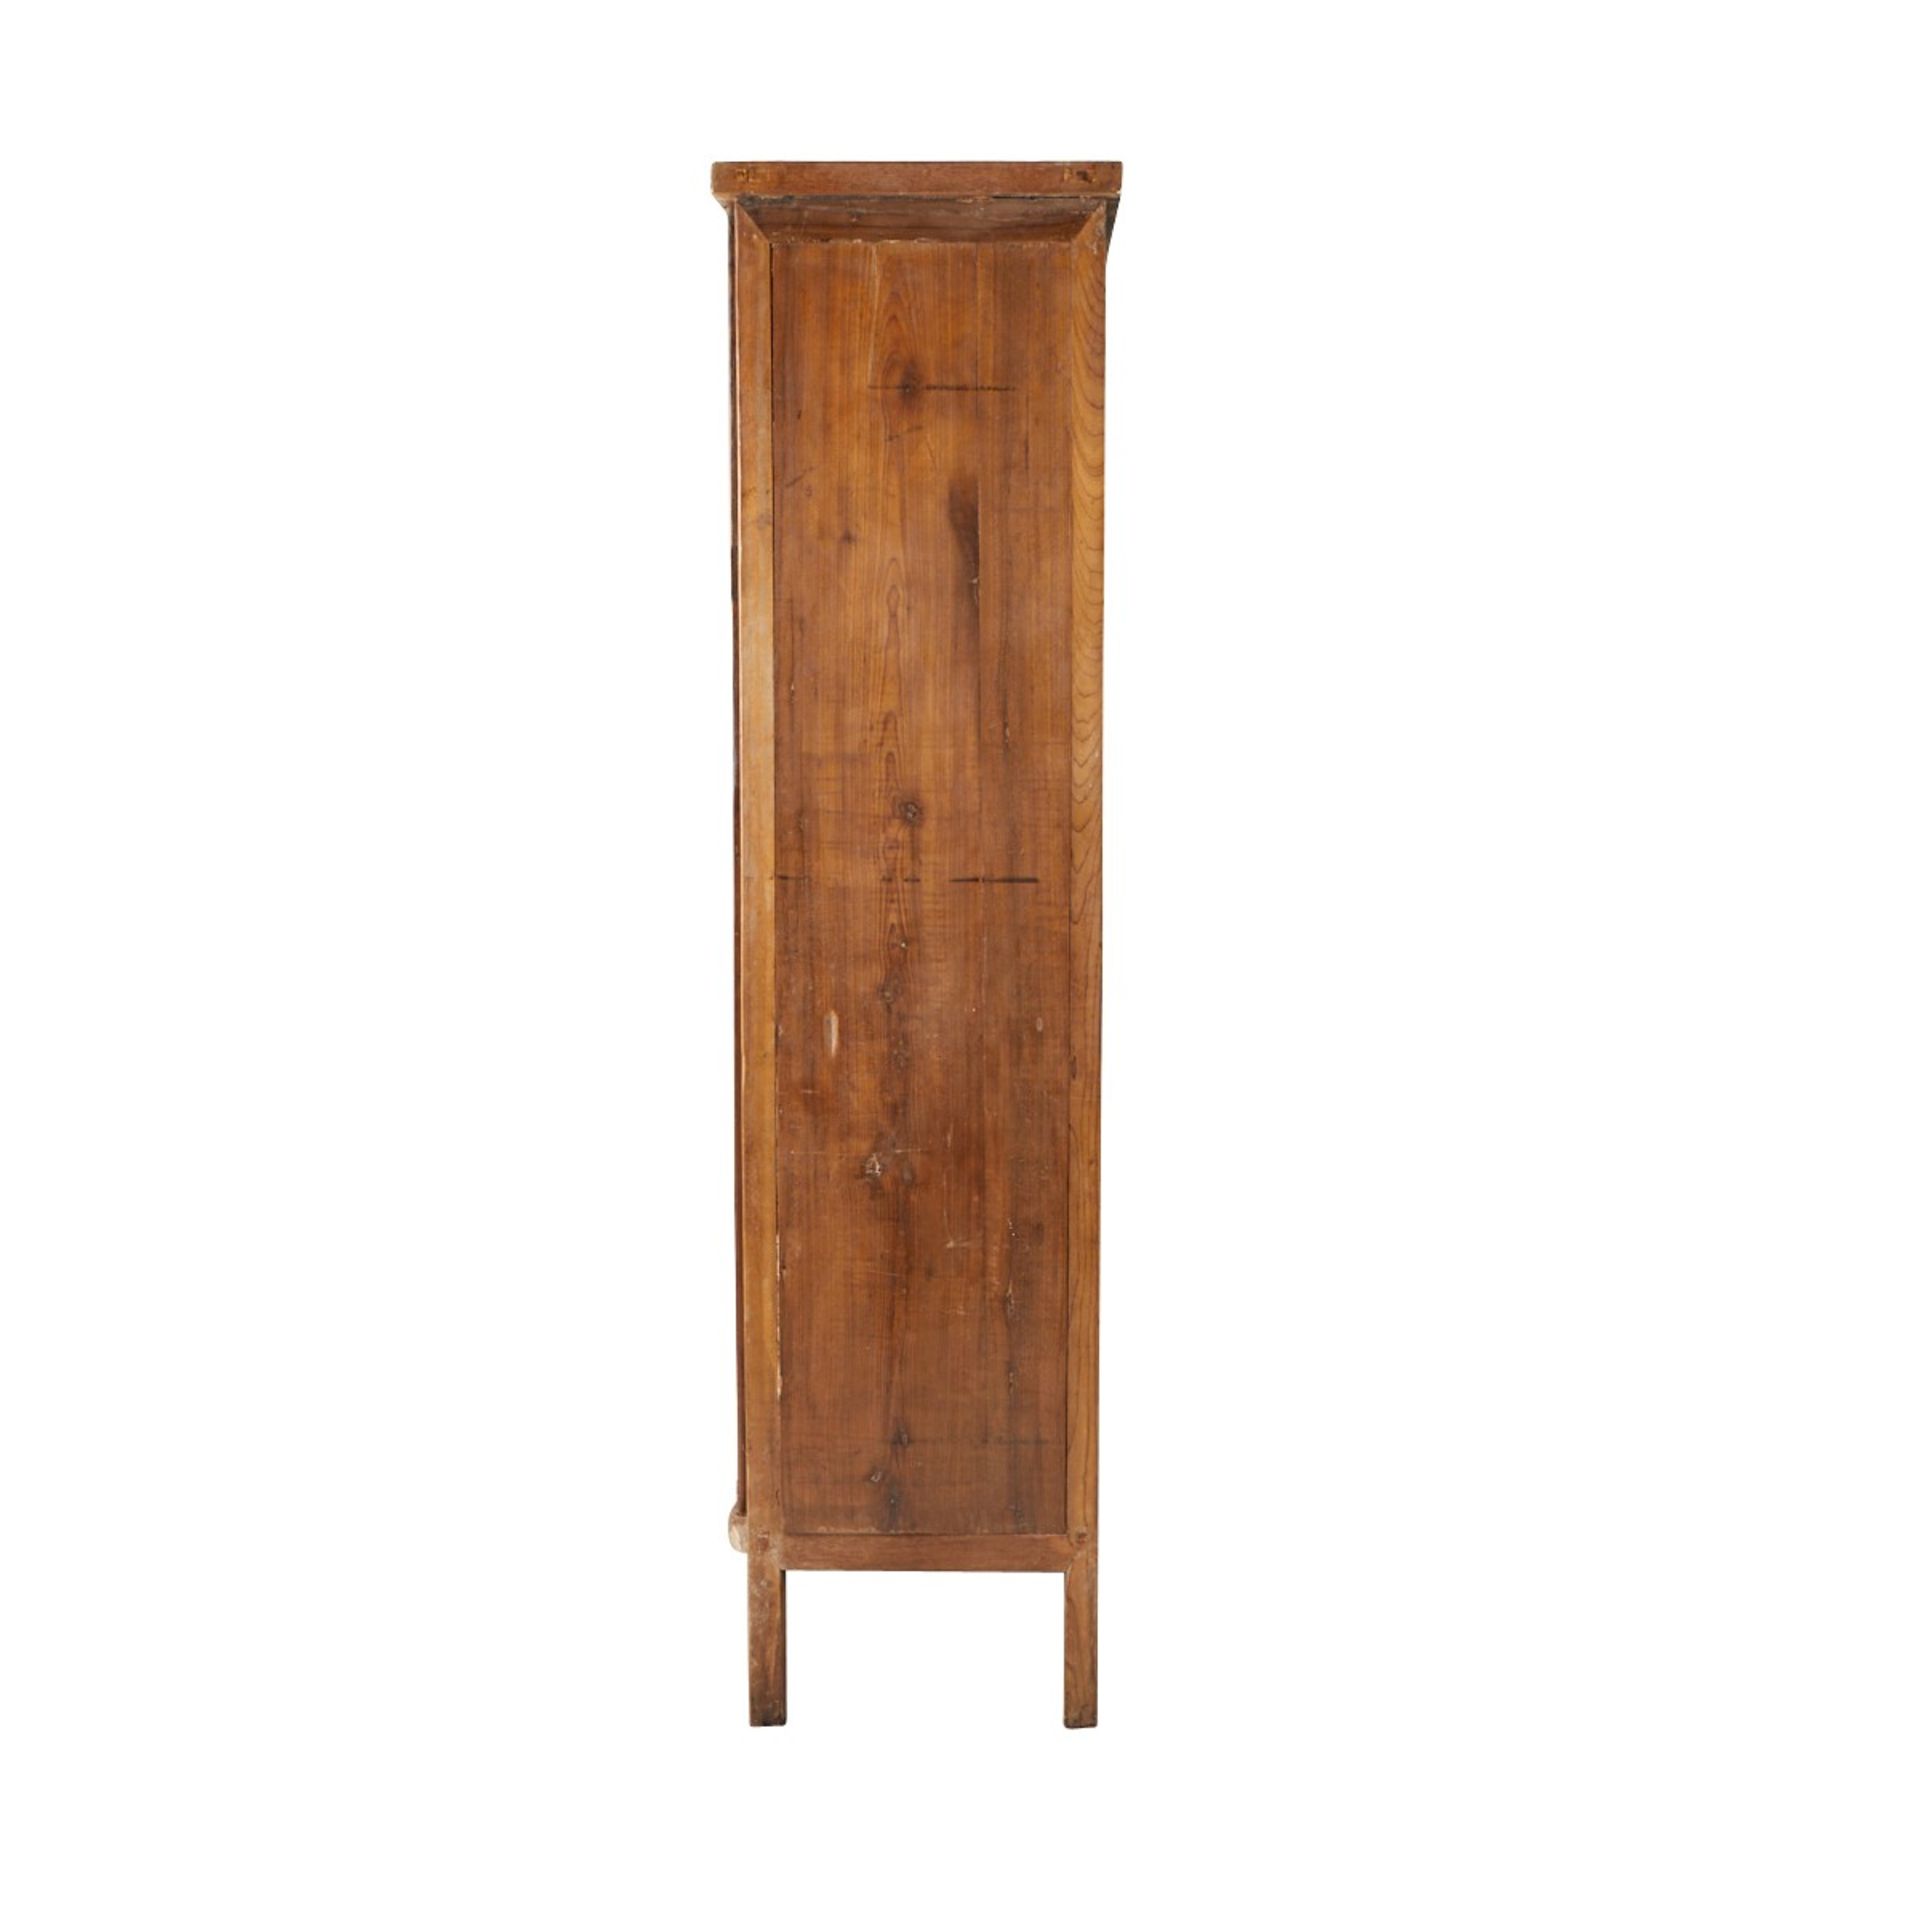 Antique Chinese Wood Cabinet or Wardrobe - Image 4 of 15